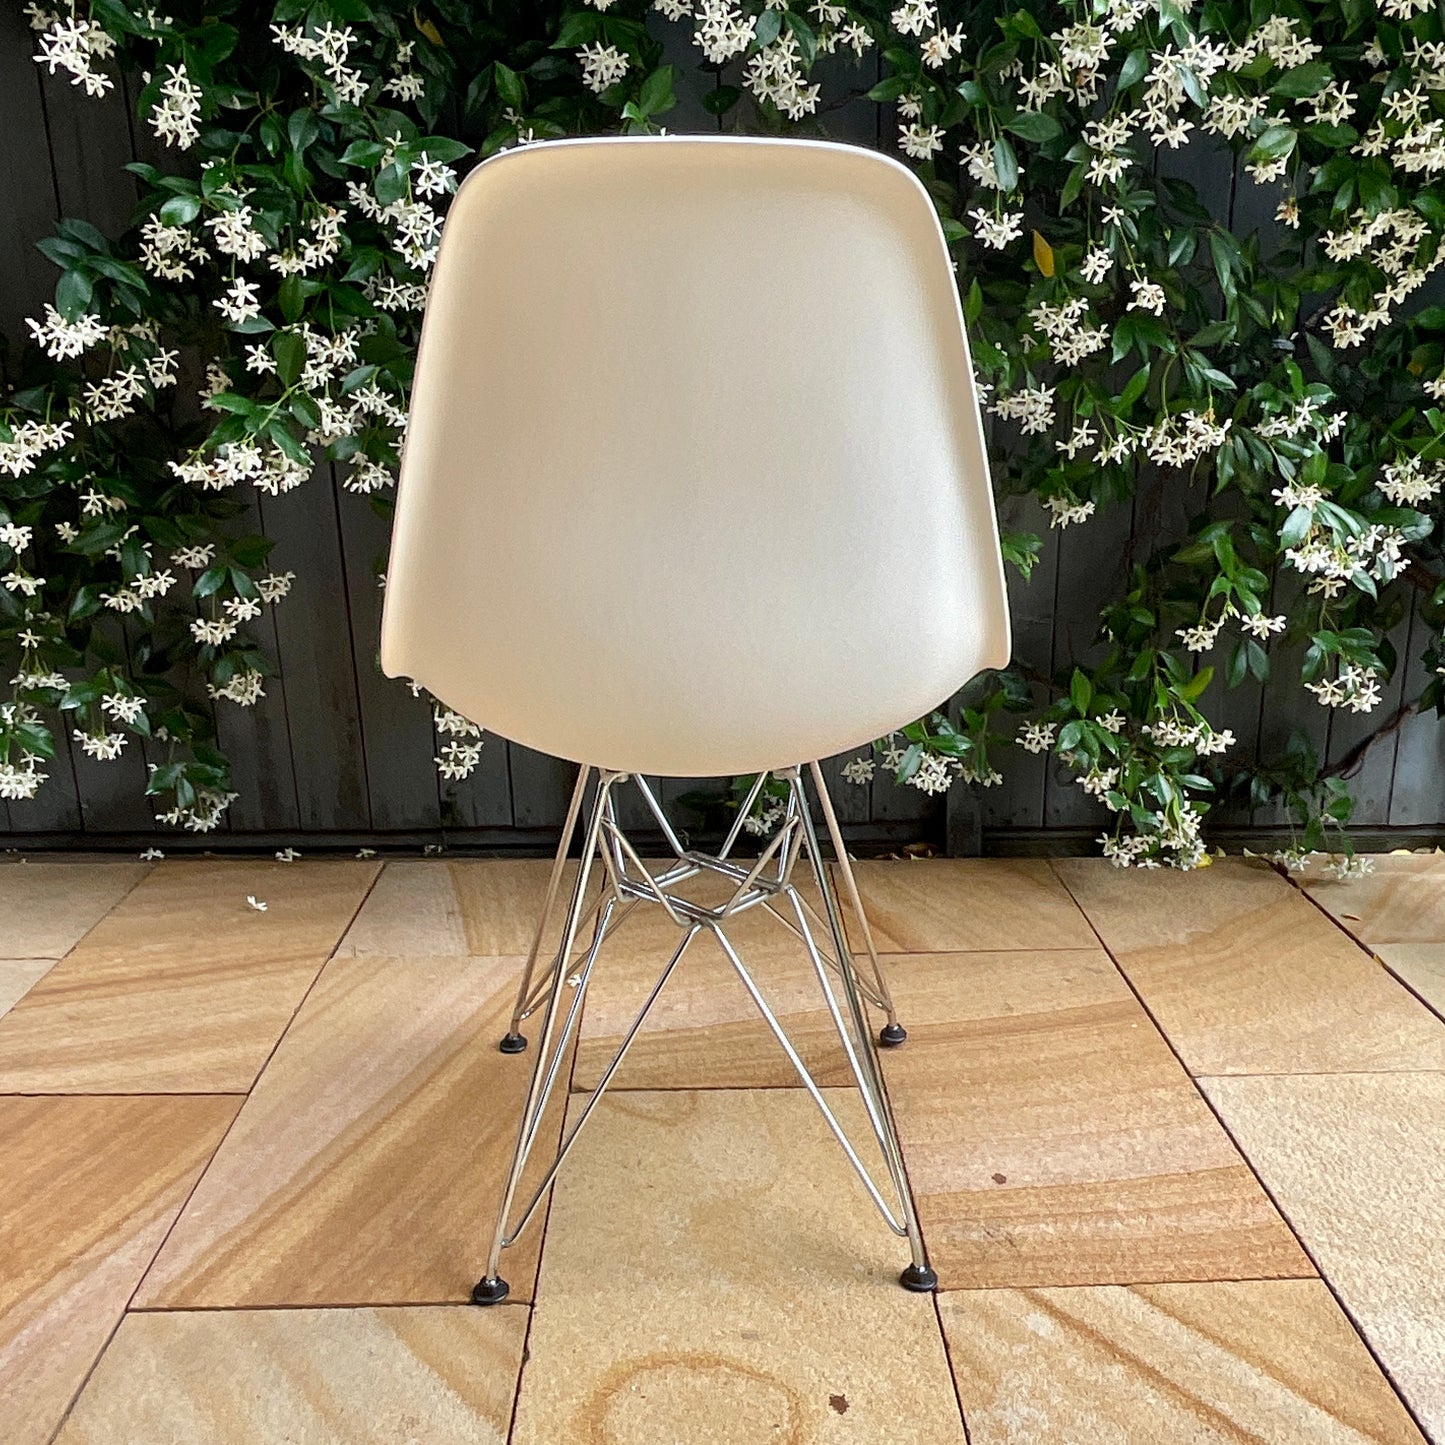 Load image into Gallery viewer, Set of FOUR Eames Eiffel Tower Chairs by Vitra (2 sets available)
